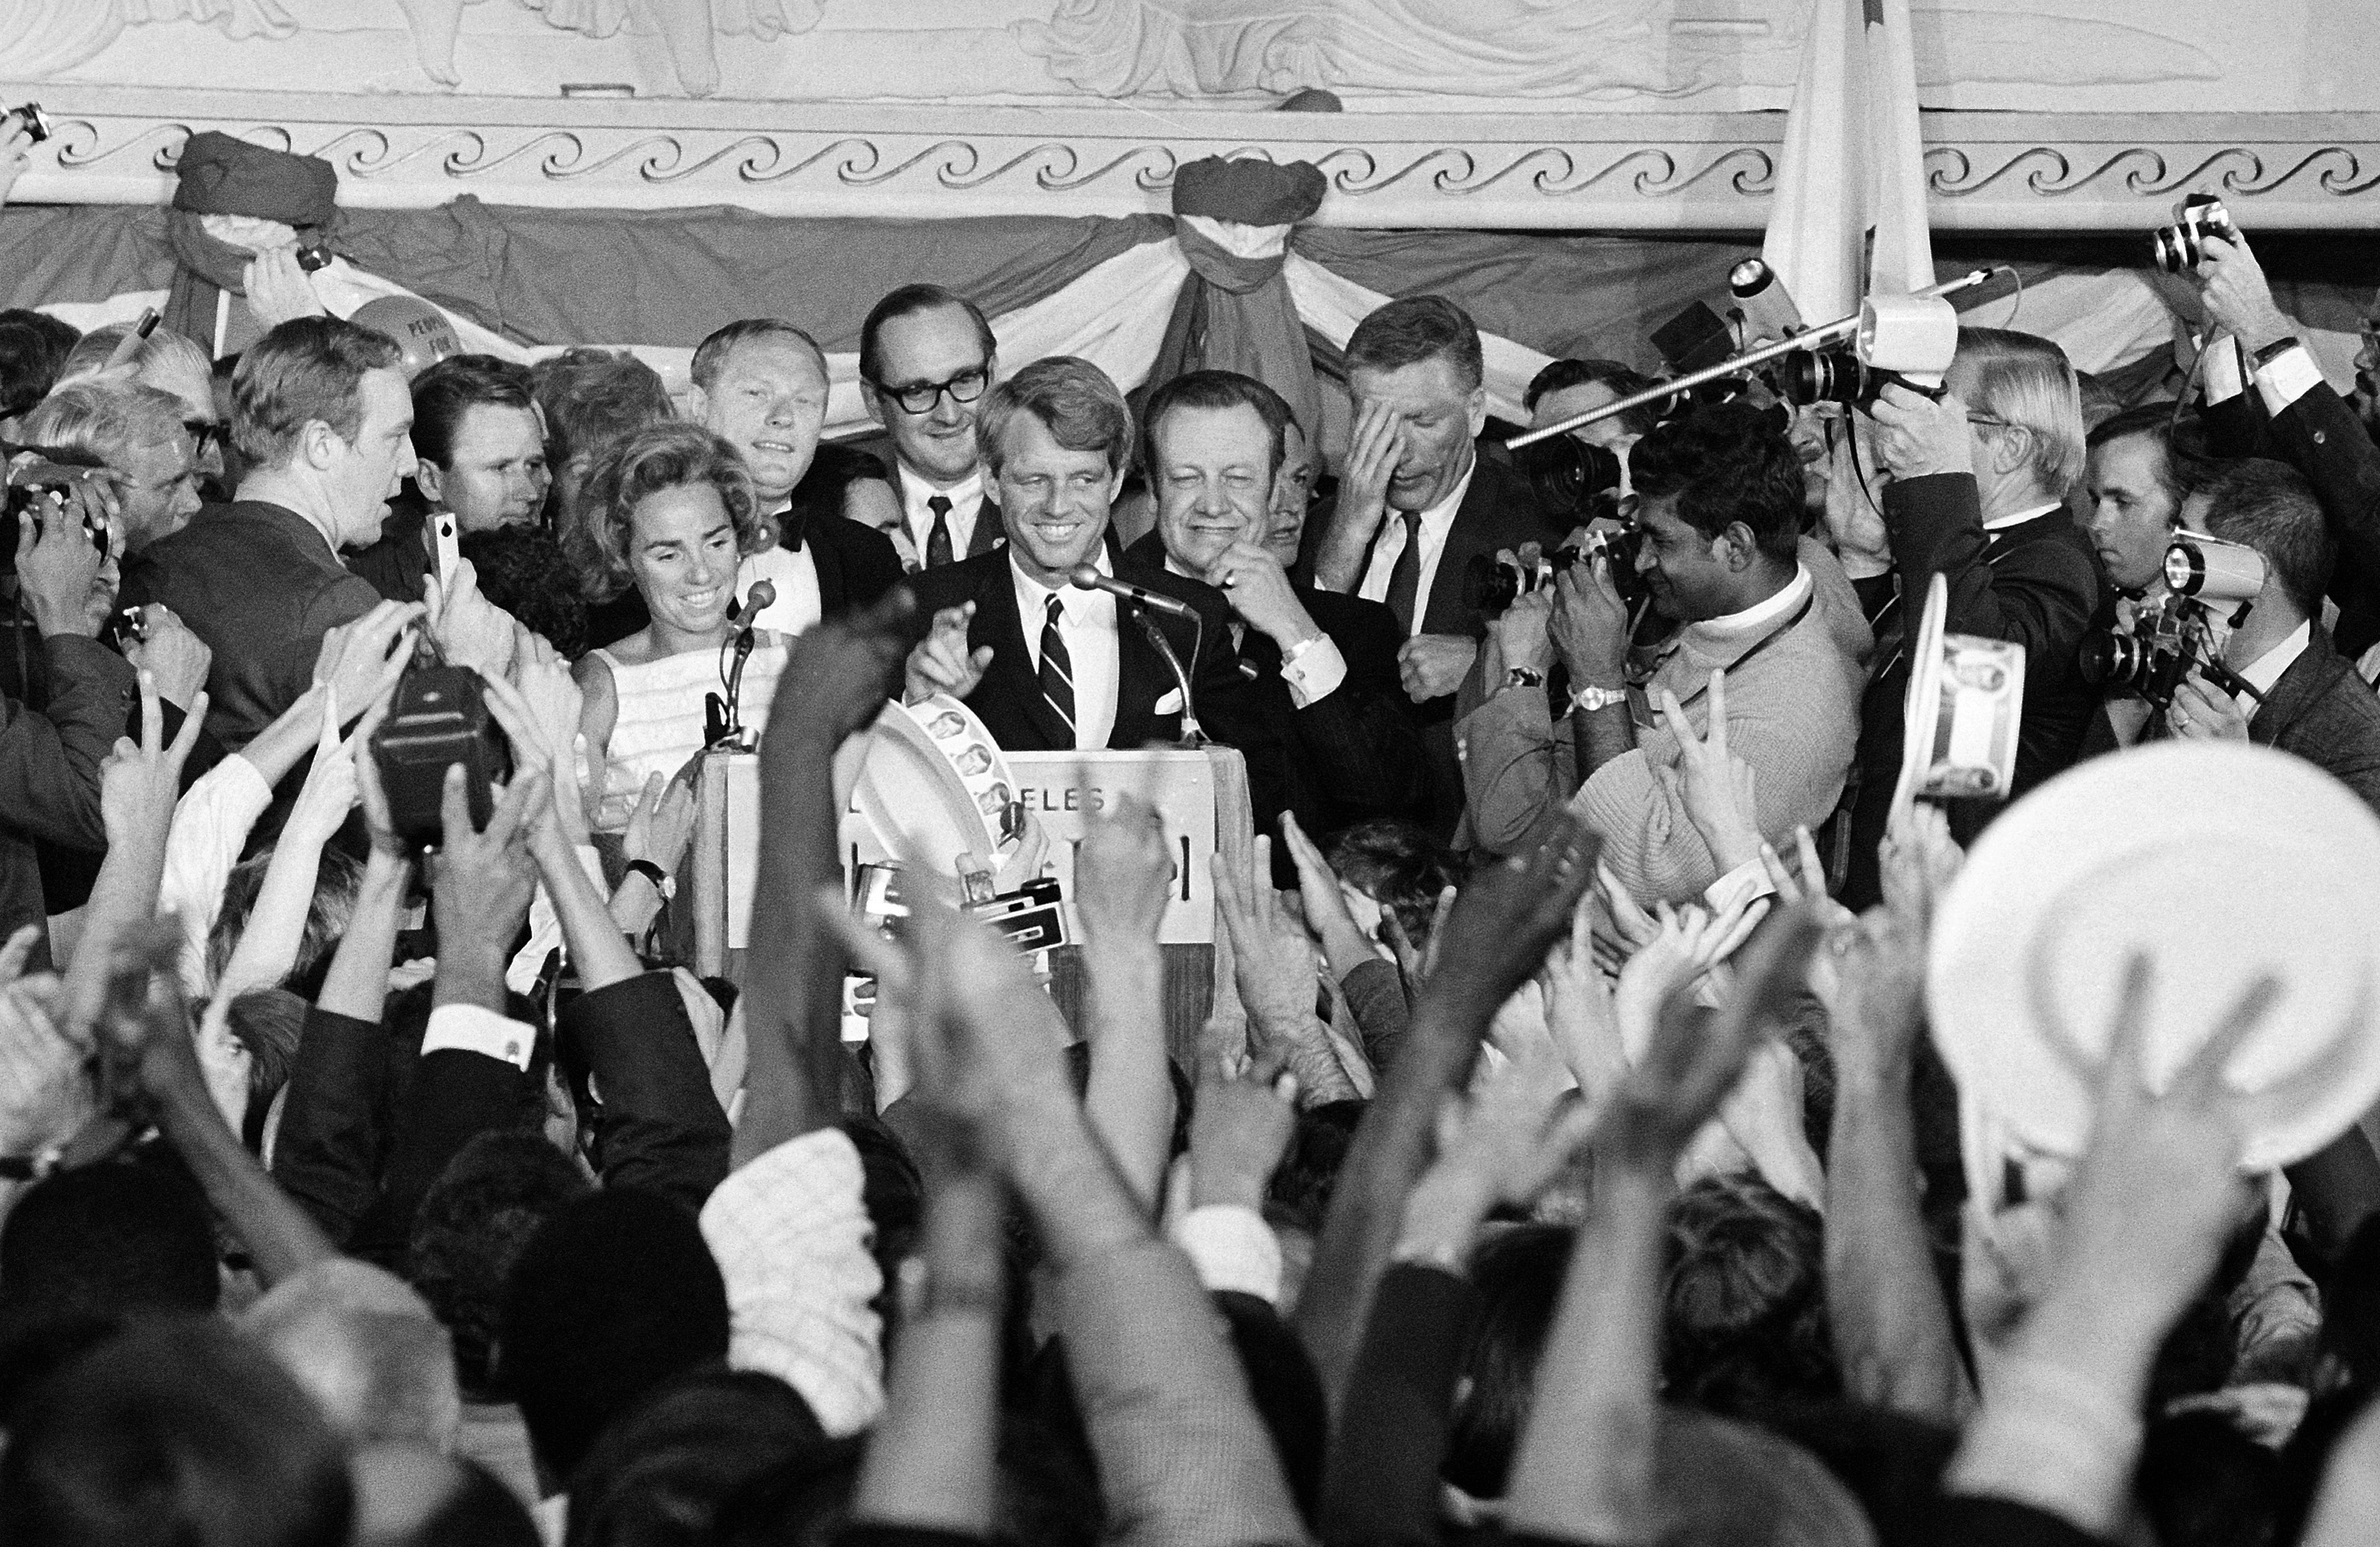 Sen. Robert Kennedy, center, stands with Ethel, left, and Speaker Jesse Unruh of the California Assembly, right, at the Ambassador Hotel in Los Angeles on June 5, 1968. the crowd gathered at the Kennedy headquarters before the shooting. (AP Photo)